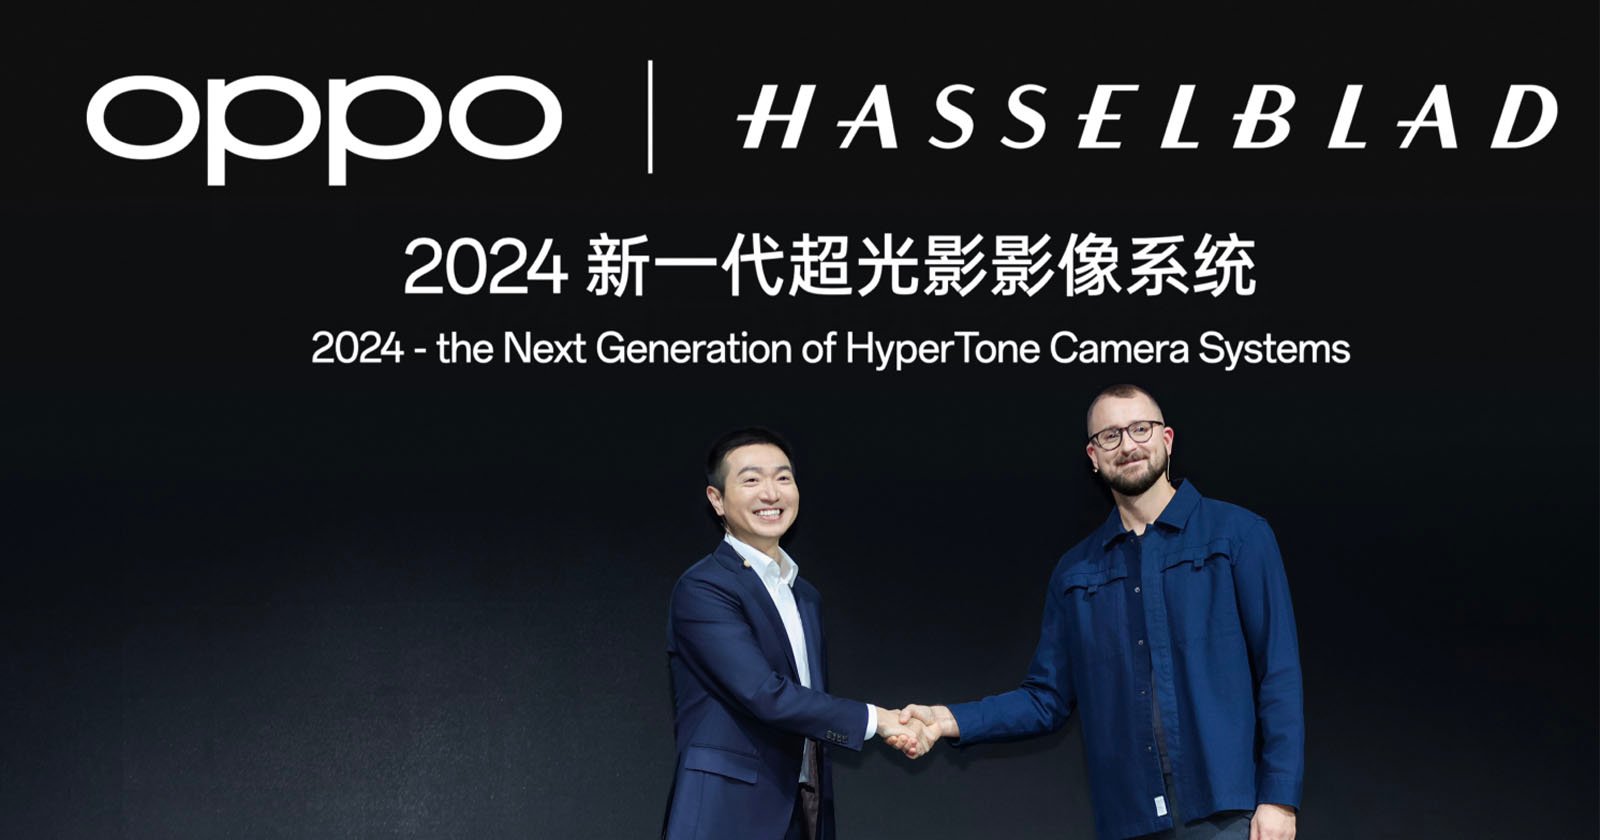 Oppo and Hasselblad Will Co-Develop a New ‘HyperTone’ Camera System